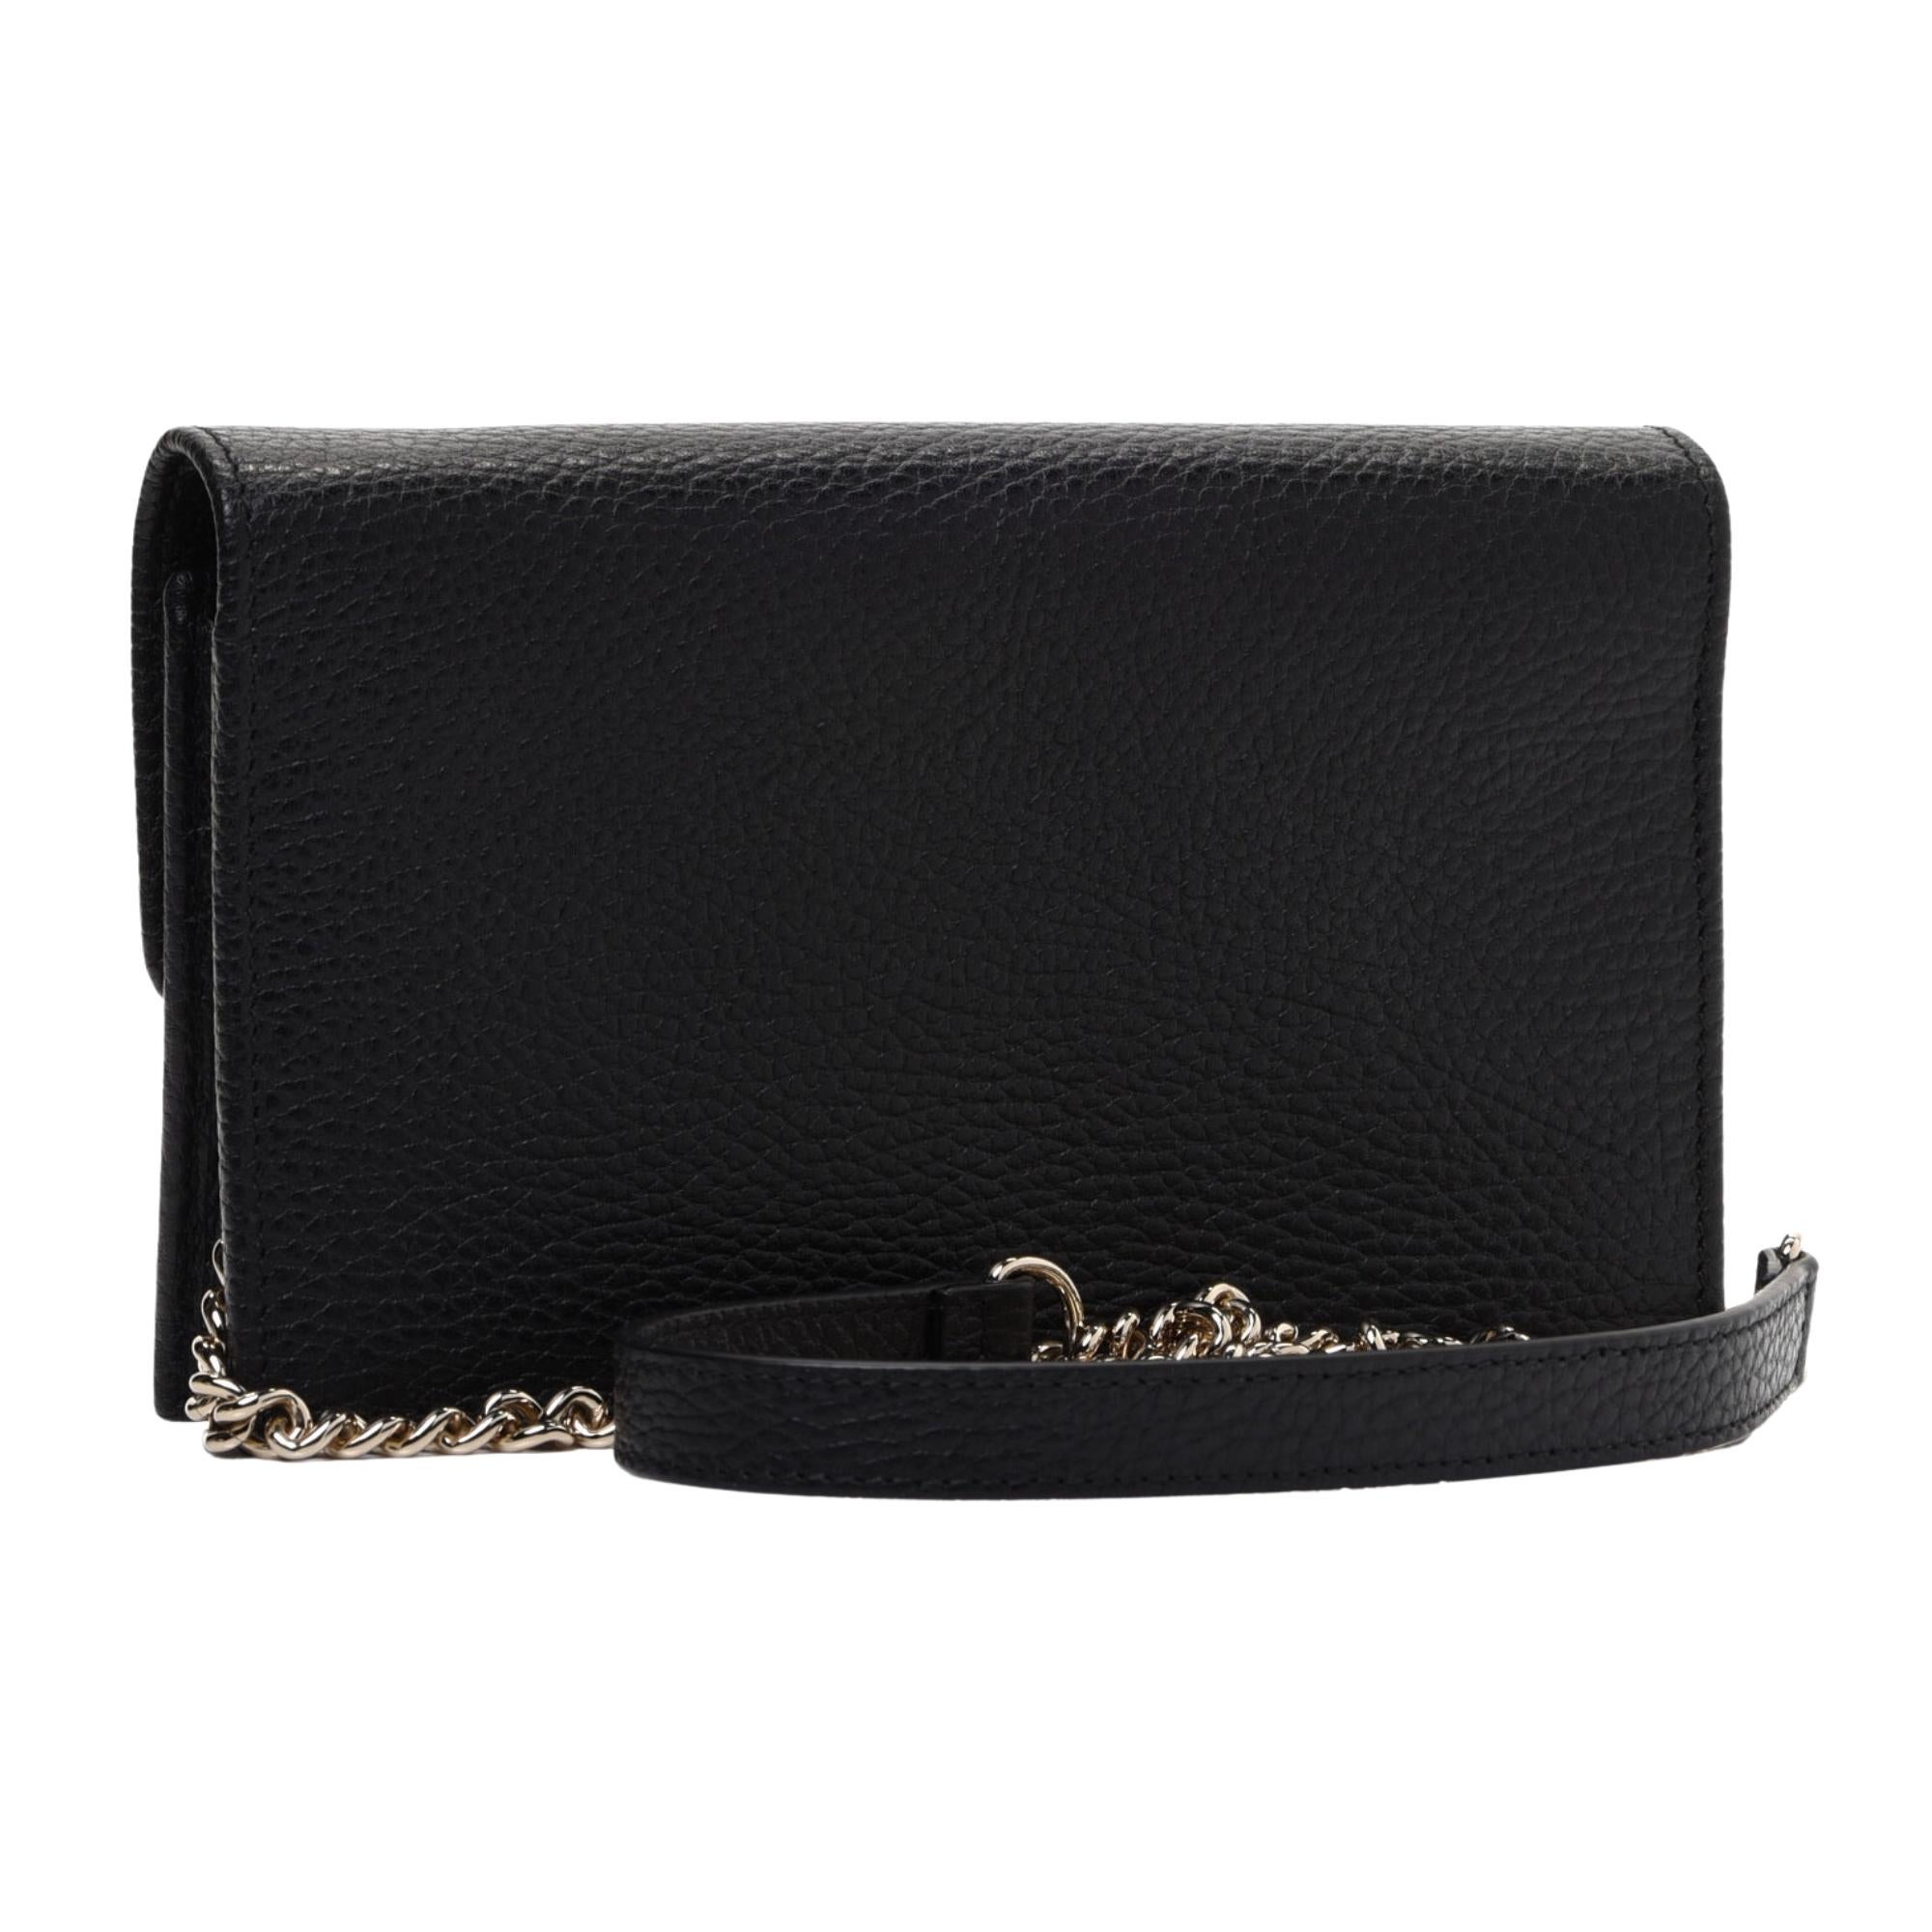 This shoulder bag is made of textured calfskin leather in a black. This bag features a long polished gold chain shoulder strap and a Gucci GG logo on the front flap. The flap opens to a partitioned leather and black fabric interior with card slot